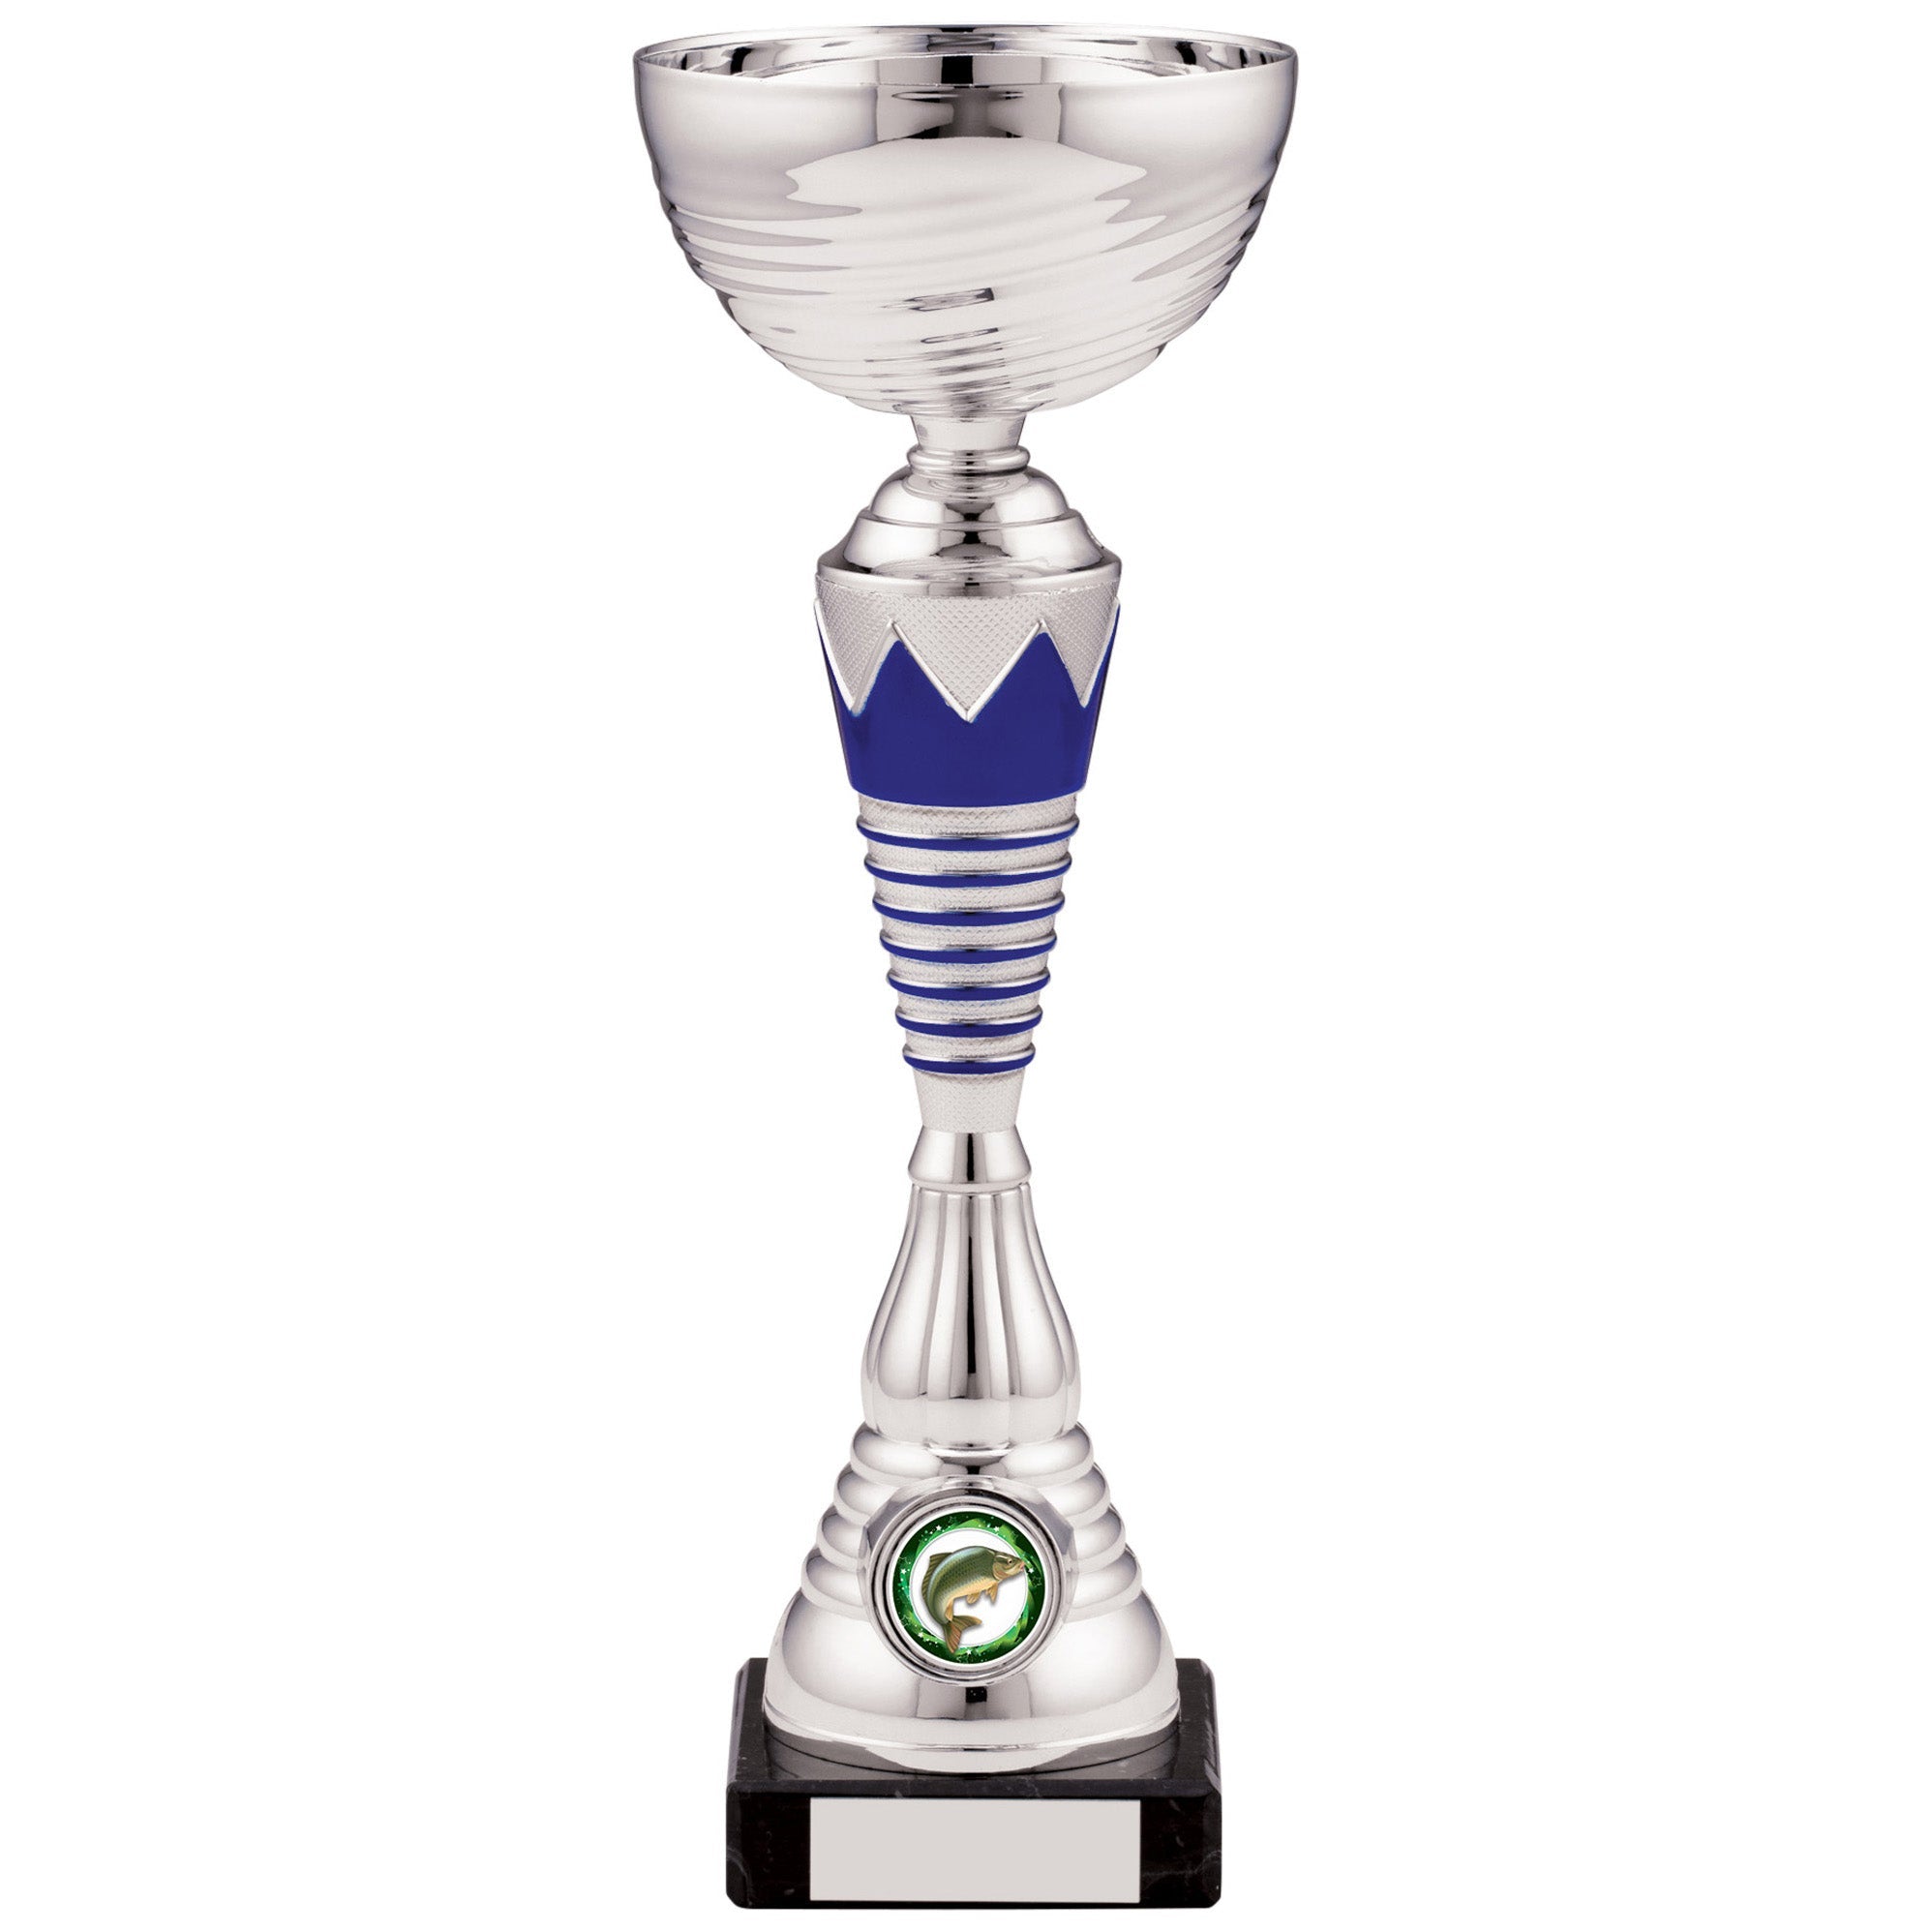 Silver Trophy Cup with Blue Crown and Rings Design